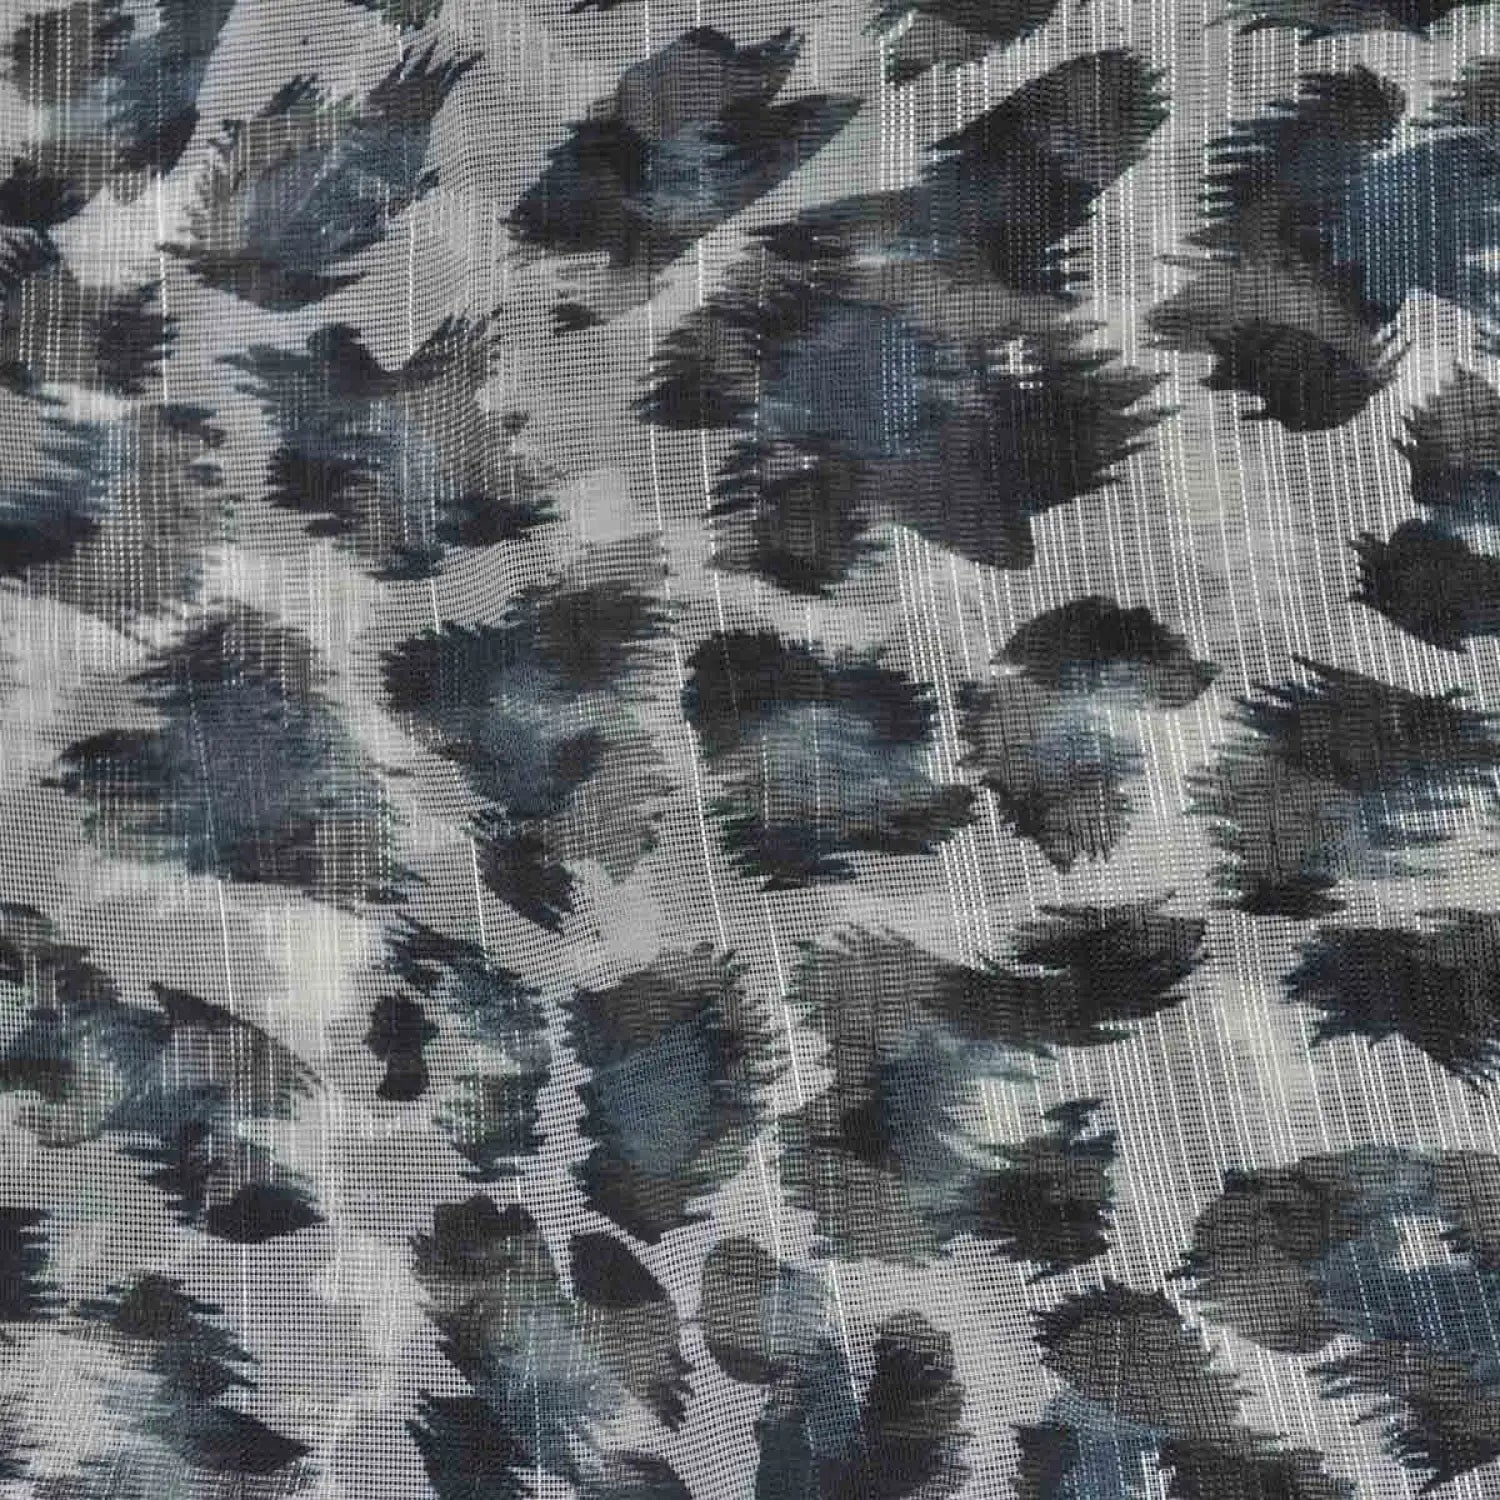 Leopard print chiffon square scarf with grey and black camouflage design